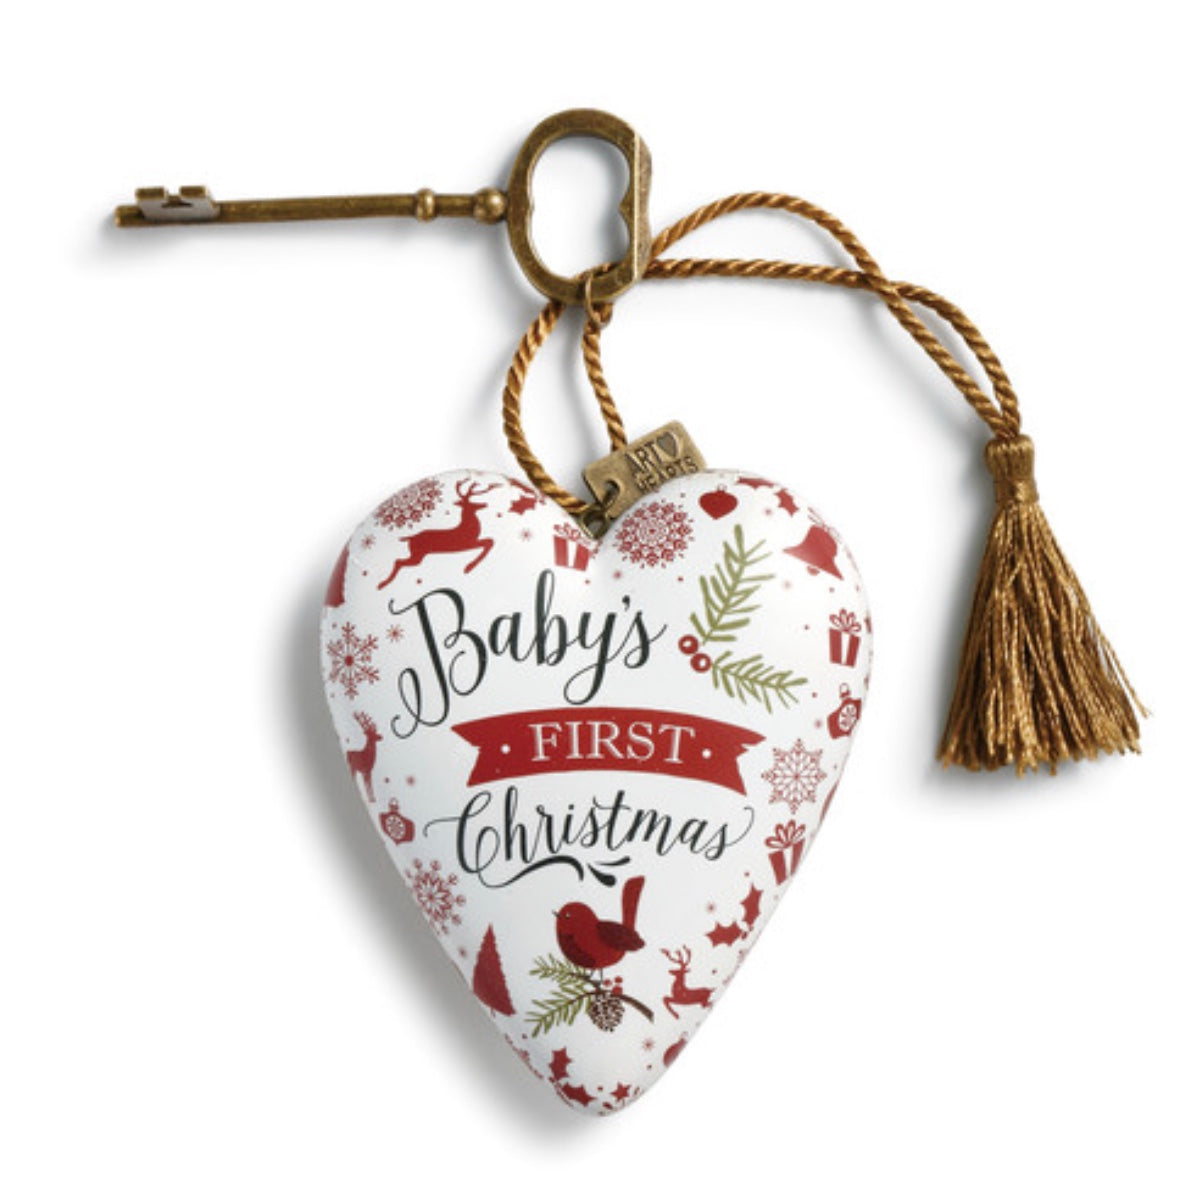 "Baby's First Christmas" Art Heart | Putti Christmas Canada